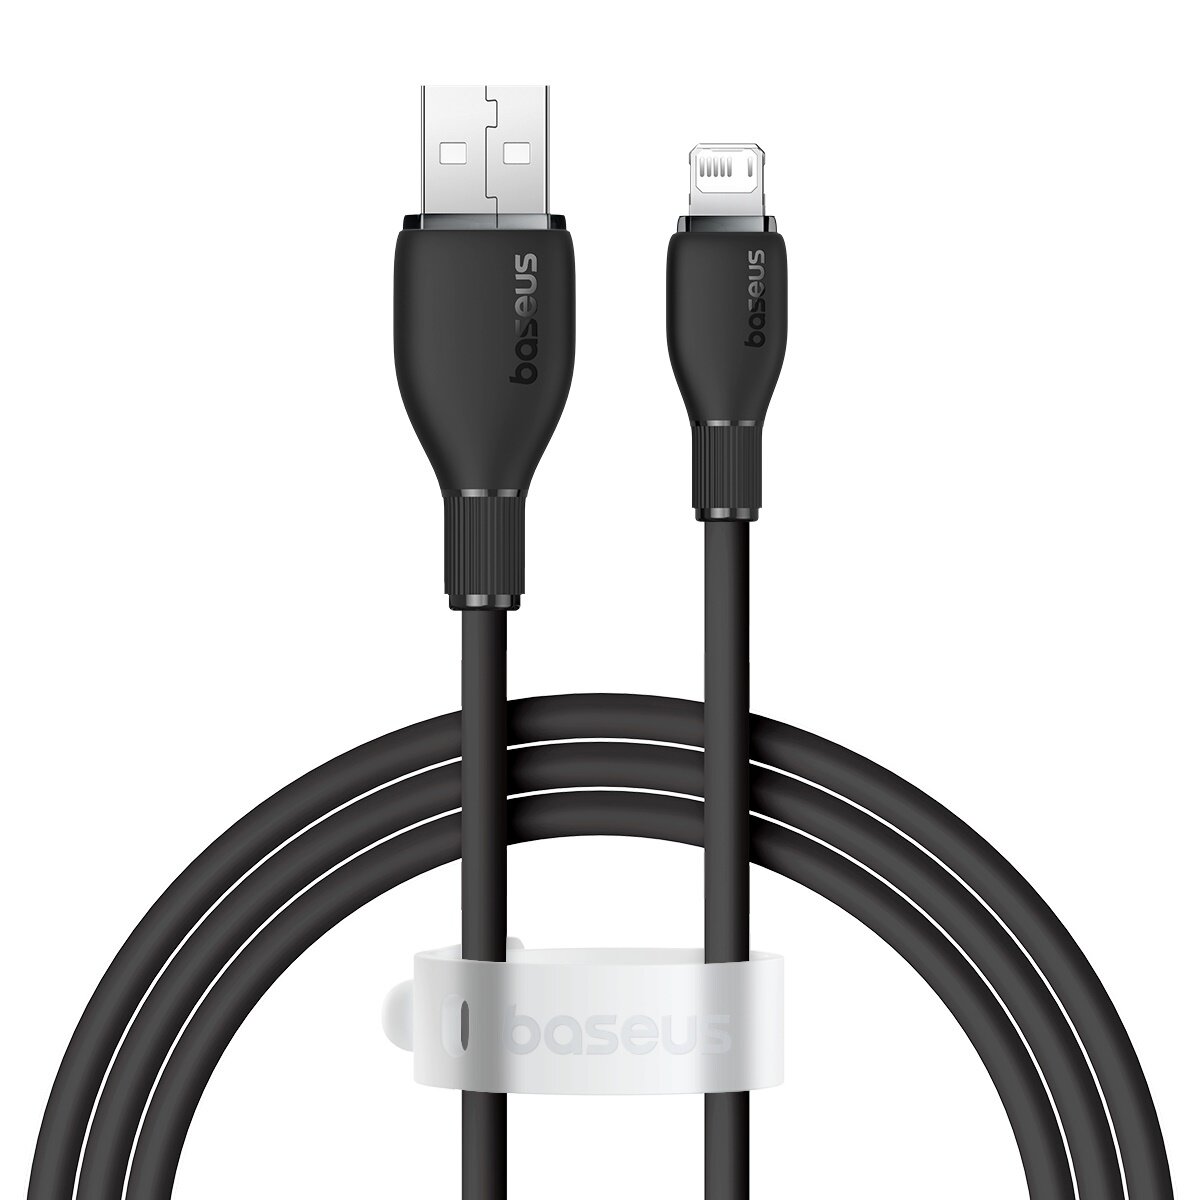 Кабель Baseus Pudding Series Fast Charging Cable USB to iP 2.4A 1.2m Cluster Black (P10355700111-00)